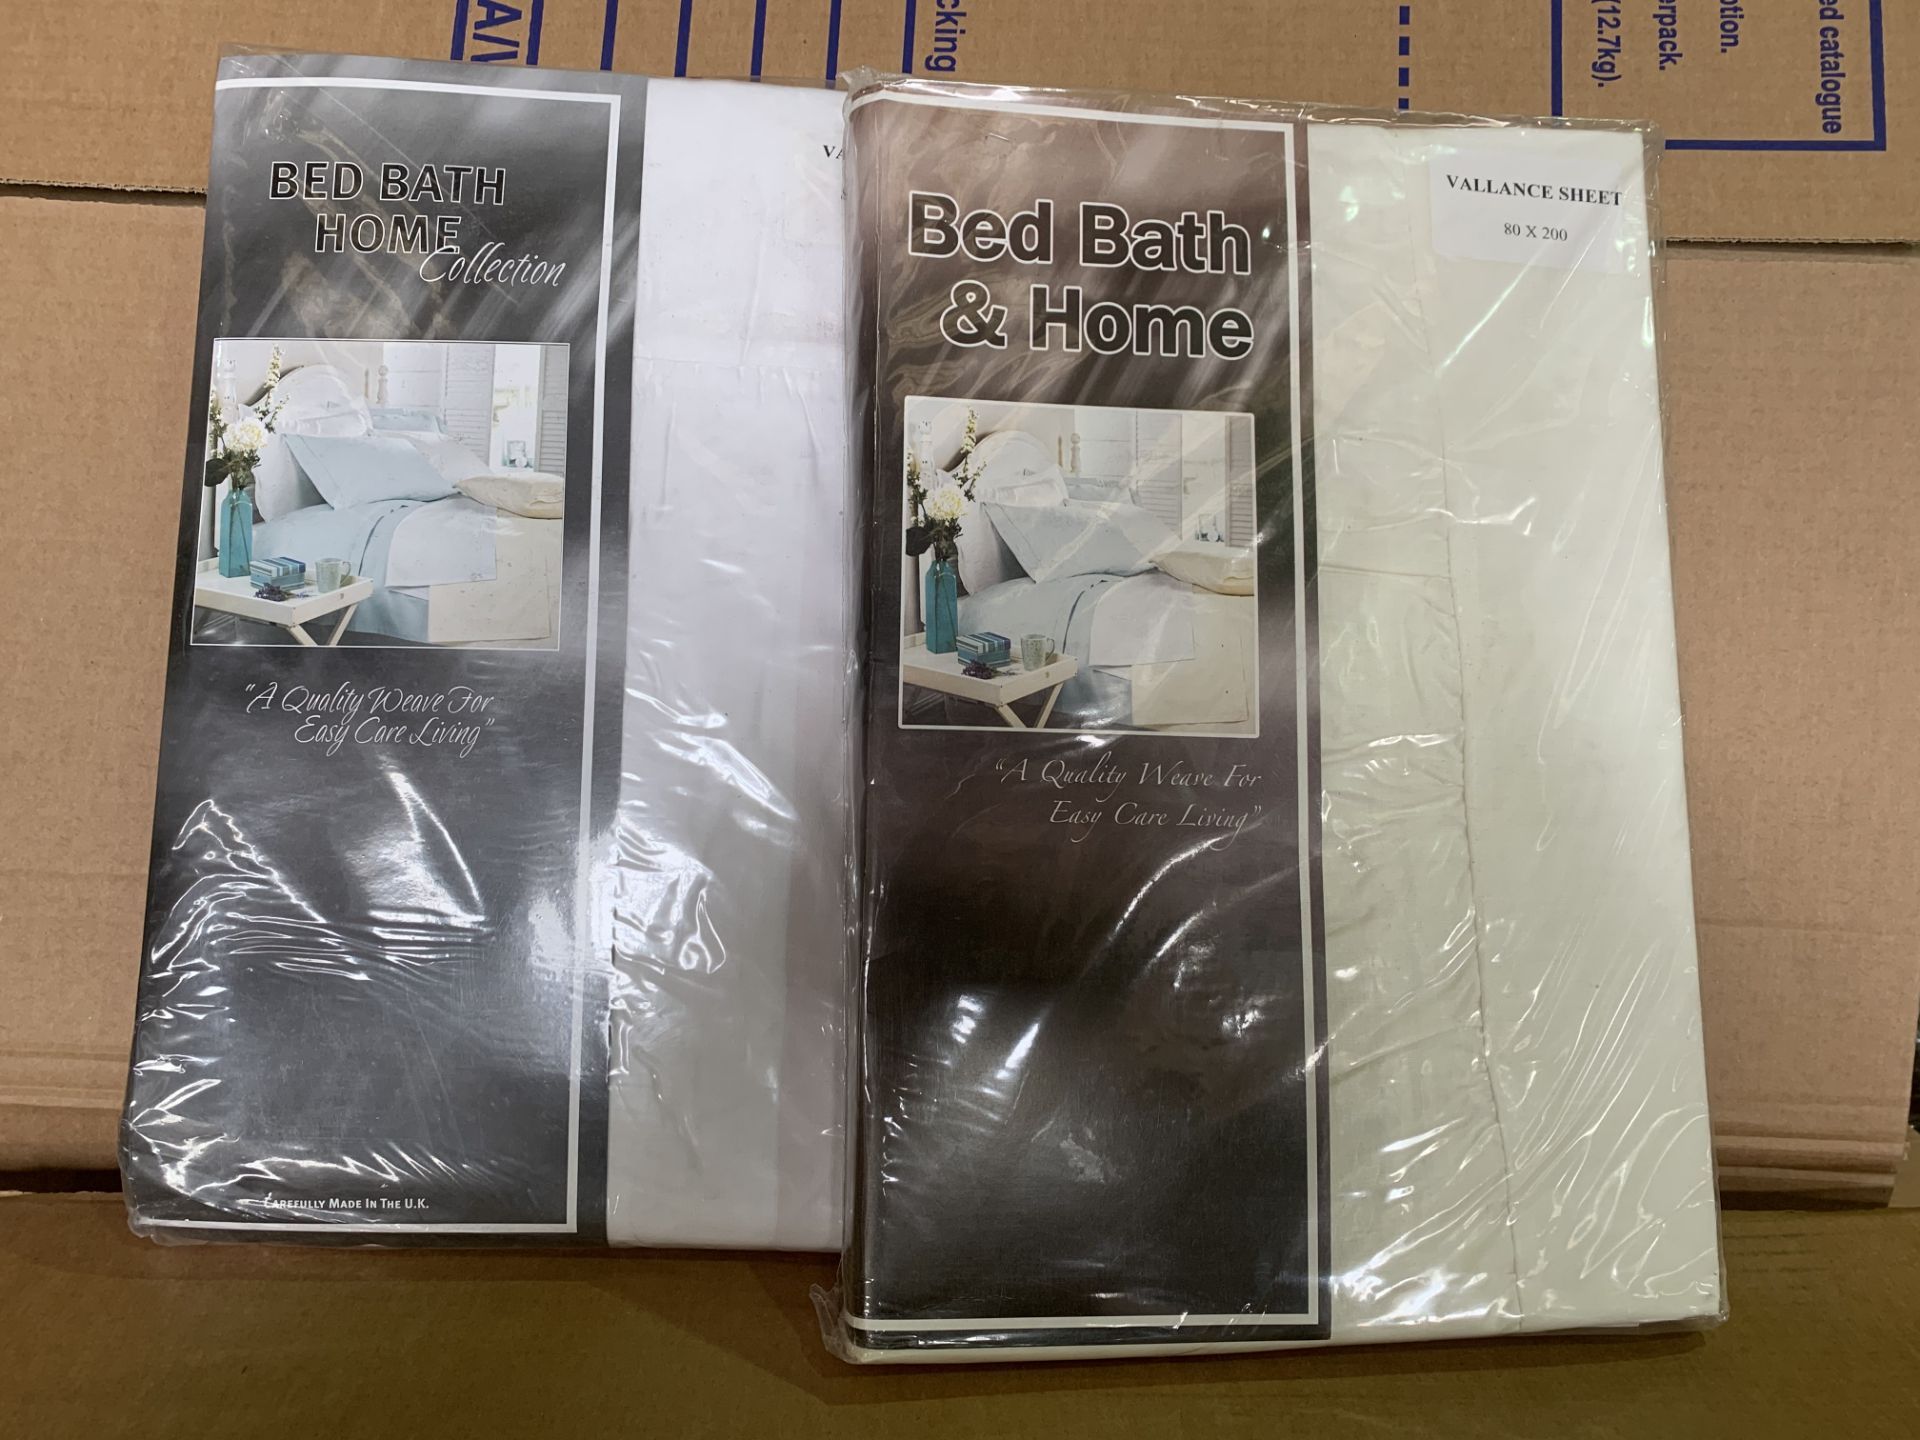 20 X BRAND NEW BED BATH AND HOME VALANCE SHEETS 80 X 200 (COLOURS MAY VARY BETWEEN CREAM AND